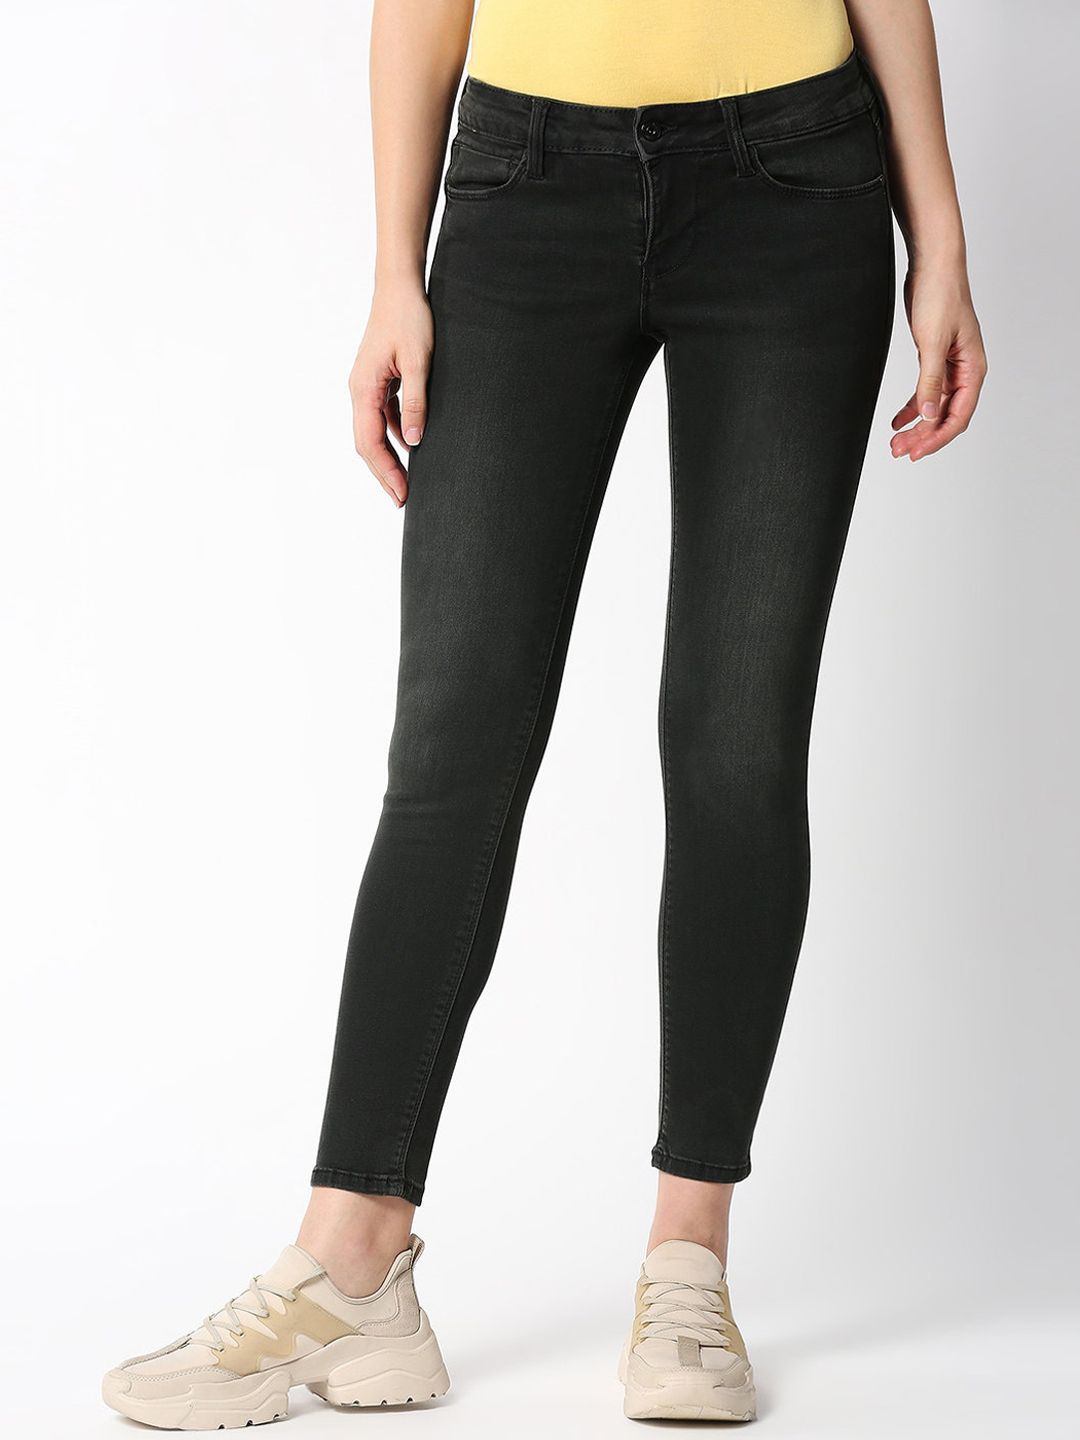 Pepe Jeans Women Black Skinny Fit Light Fade Jeans Price in India